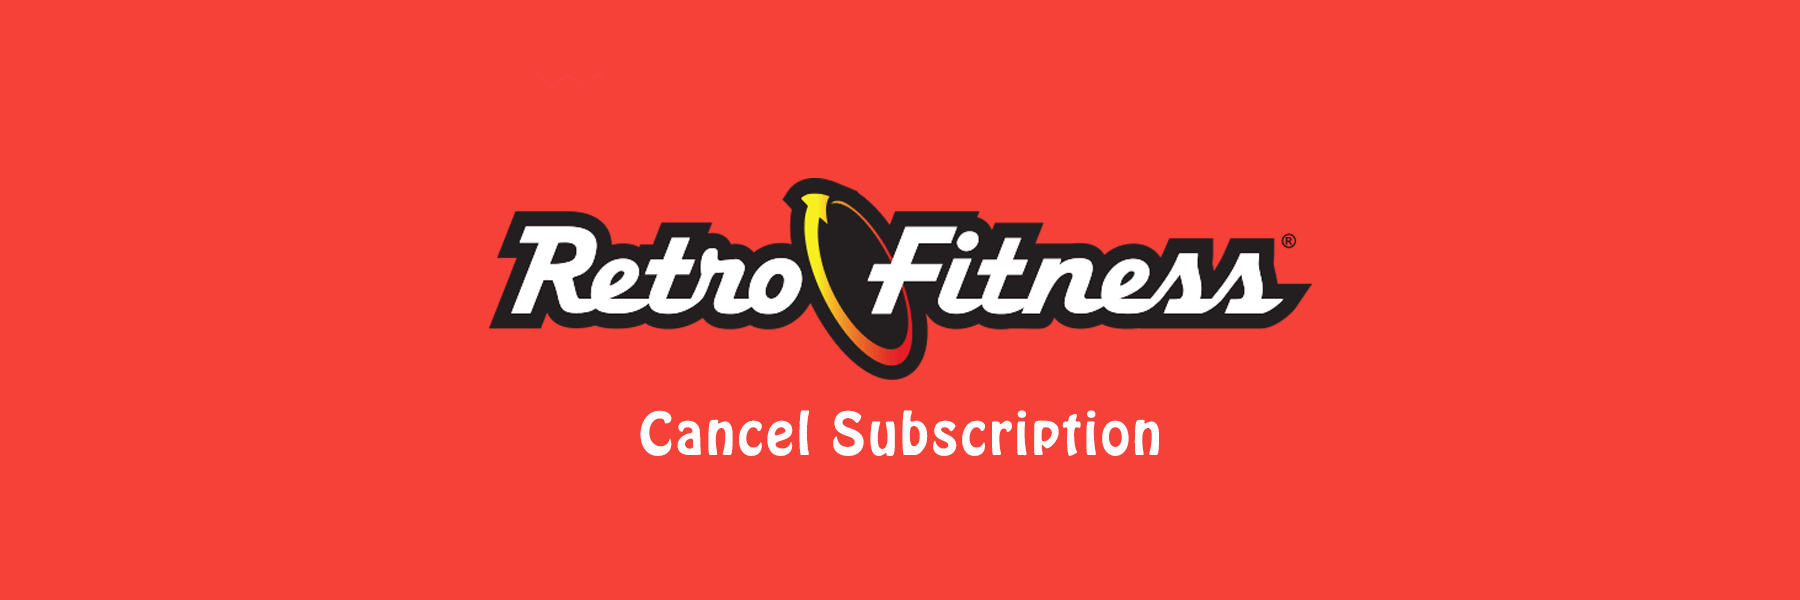 How To Cancel Retro Fitness Membership - Retro Fitness Cancellation Policy